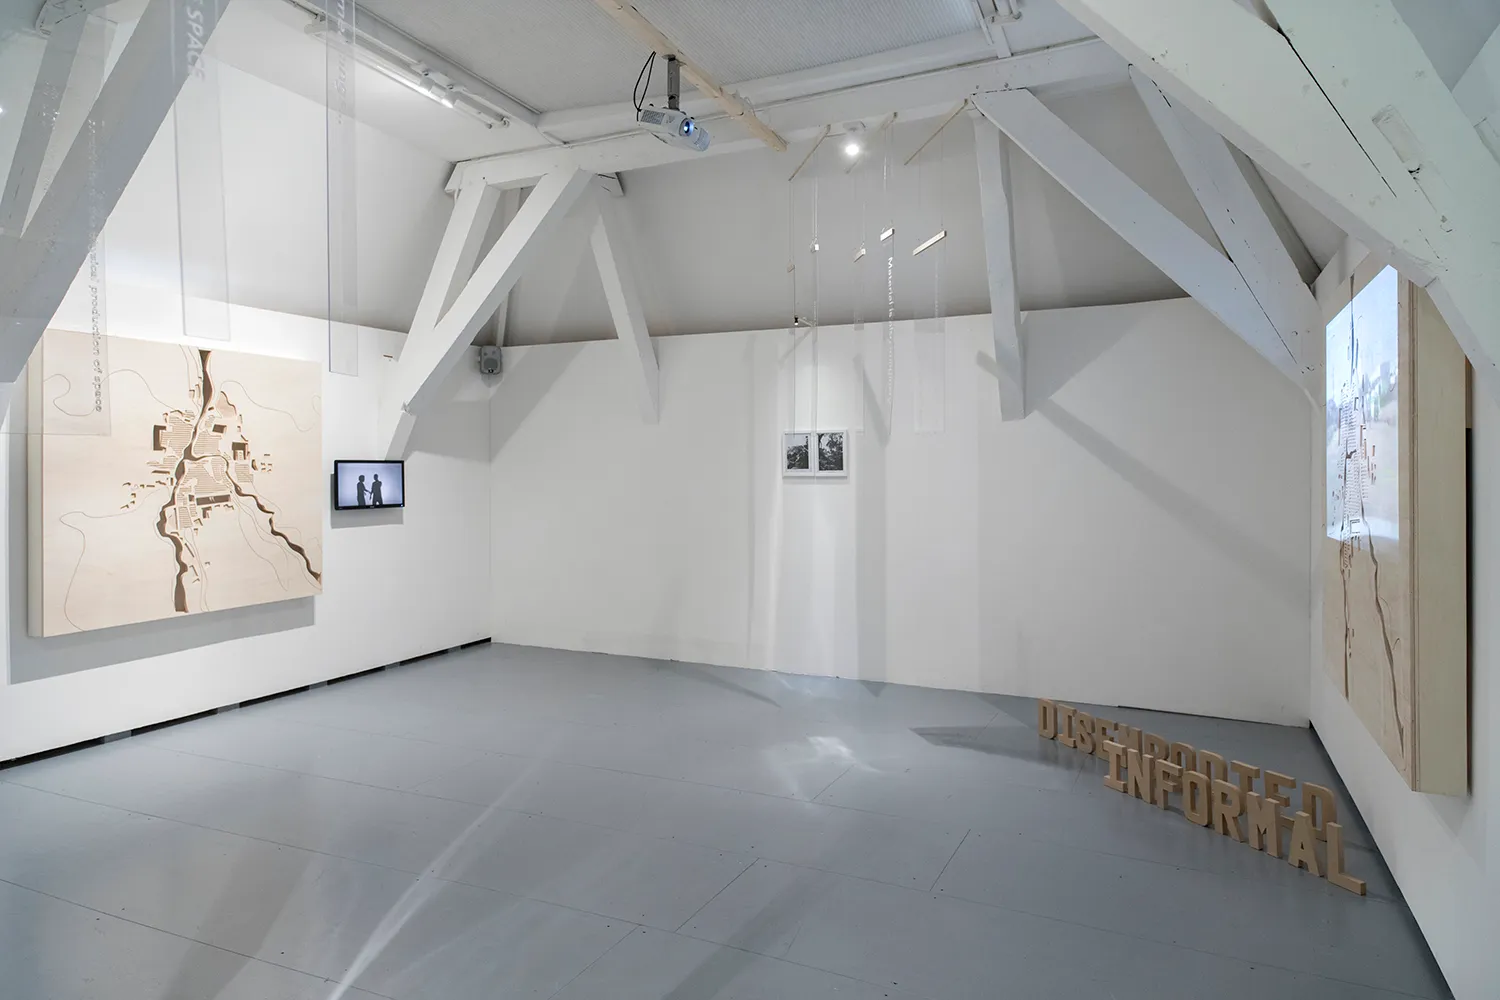 Exhibition space with the 2 carved wooden boards, small screen, 2 picture frames, plexiglas stripes hanging from the ceiling and letters 'disembodied informal' on the floor